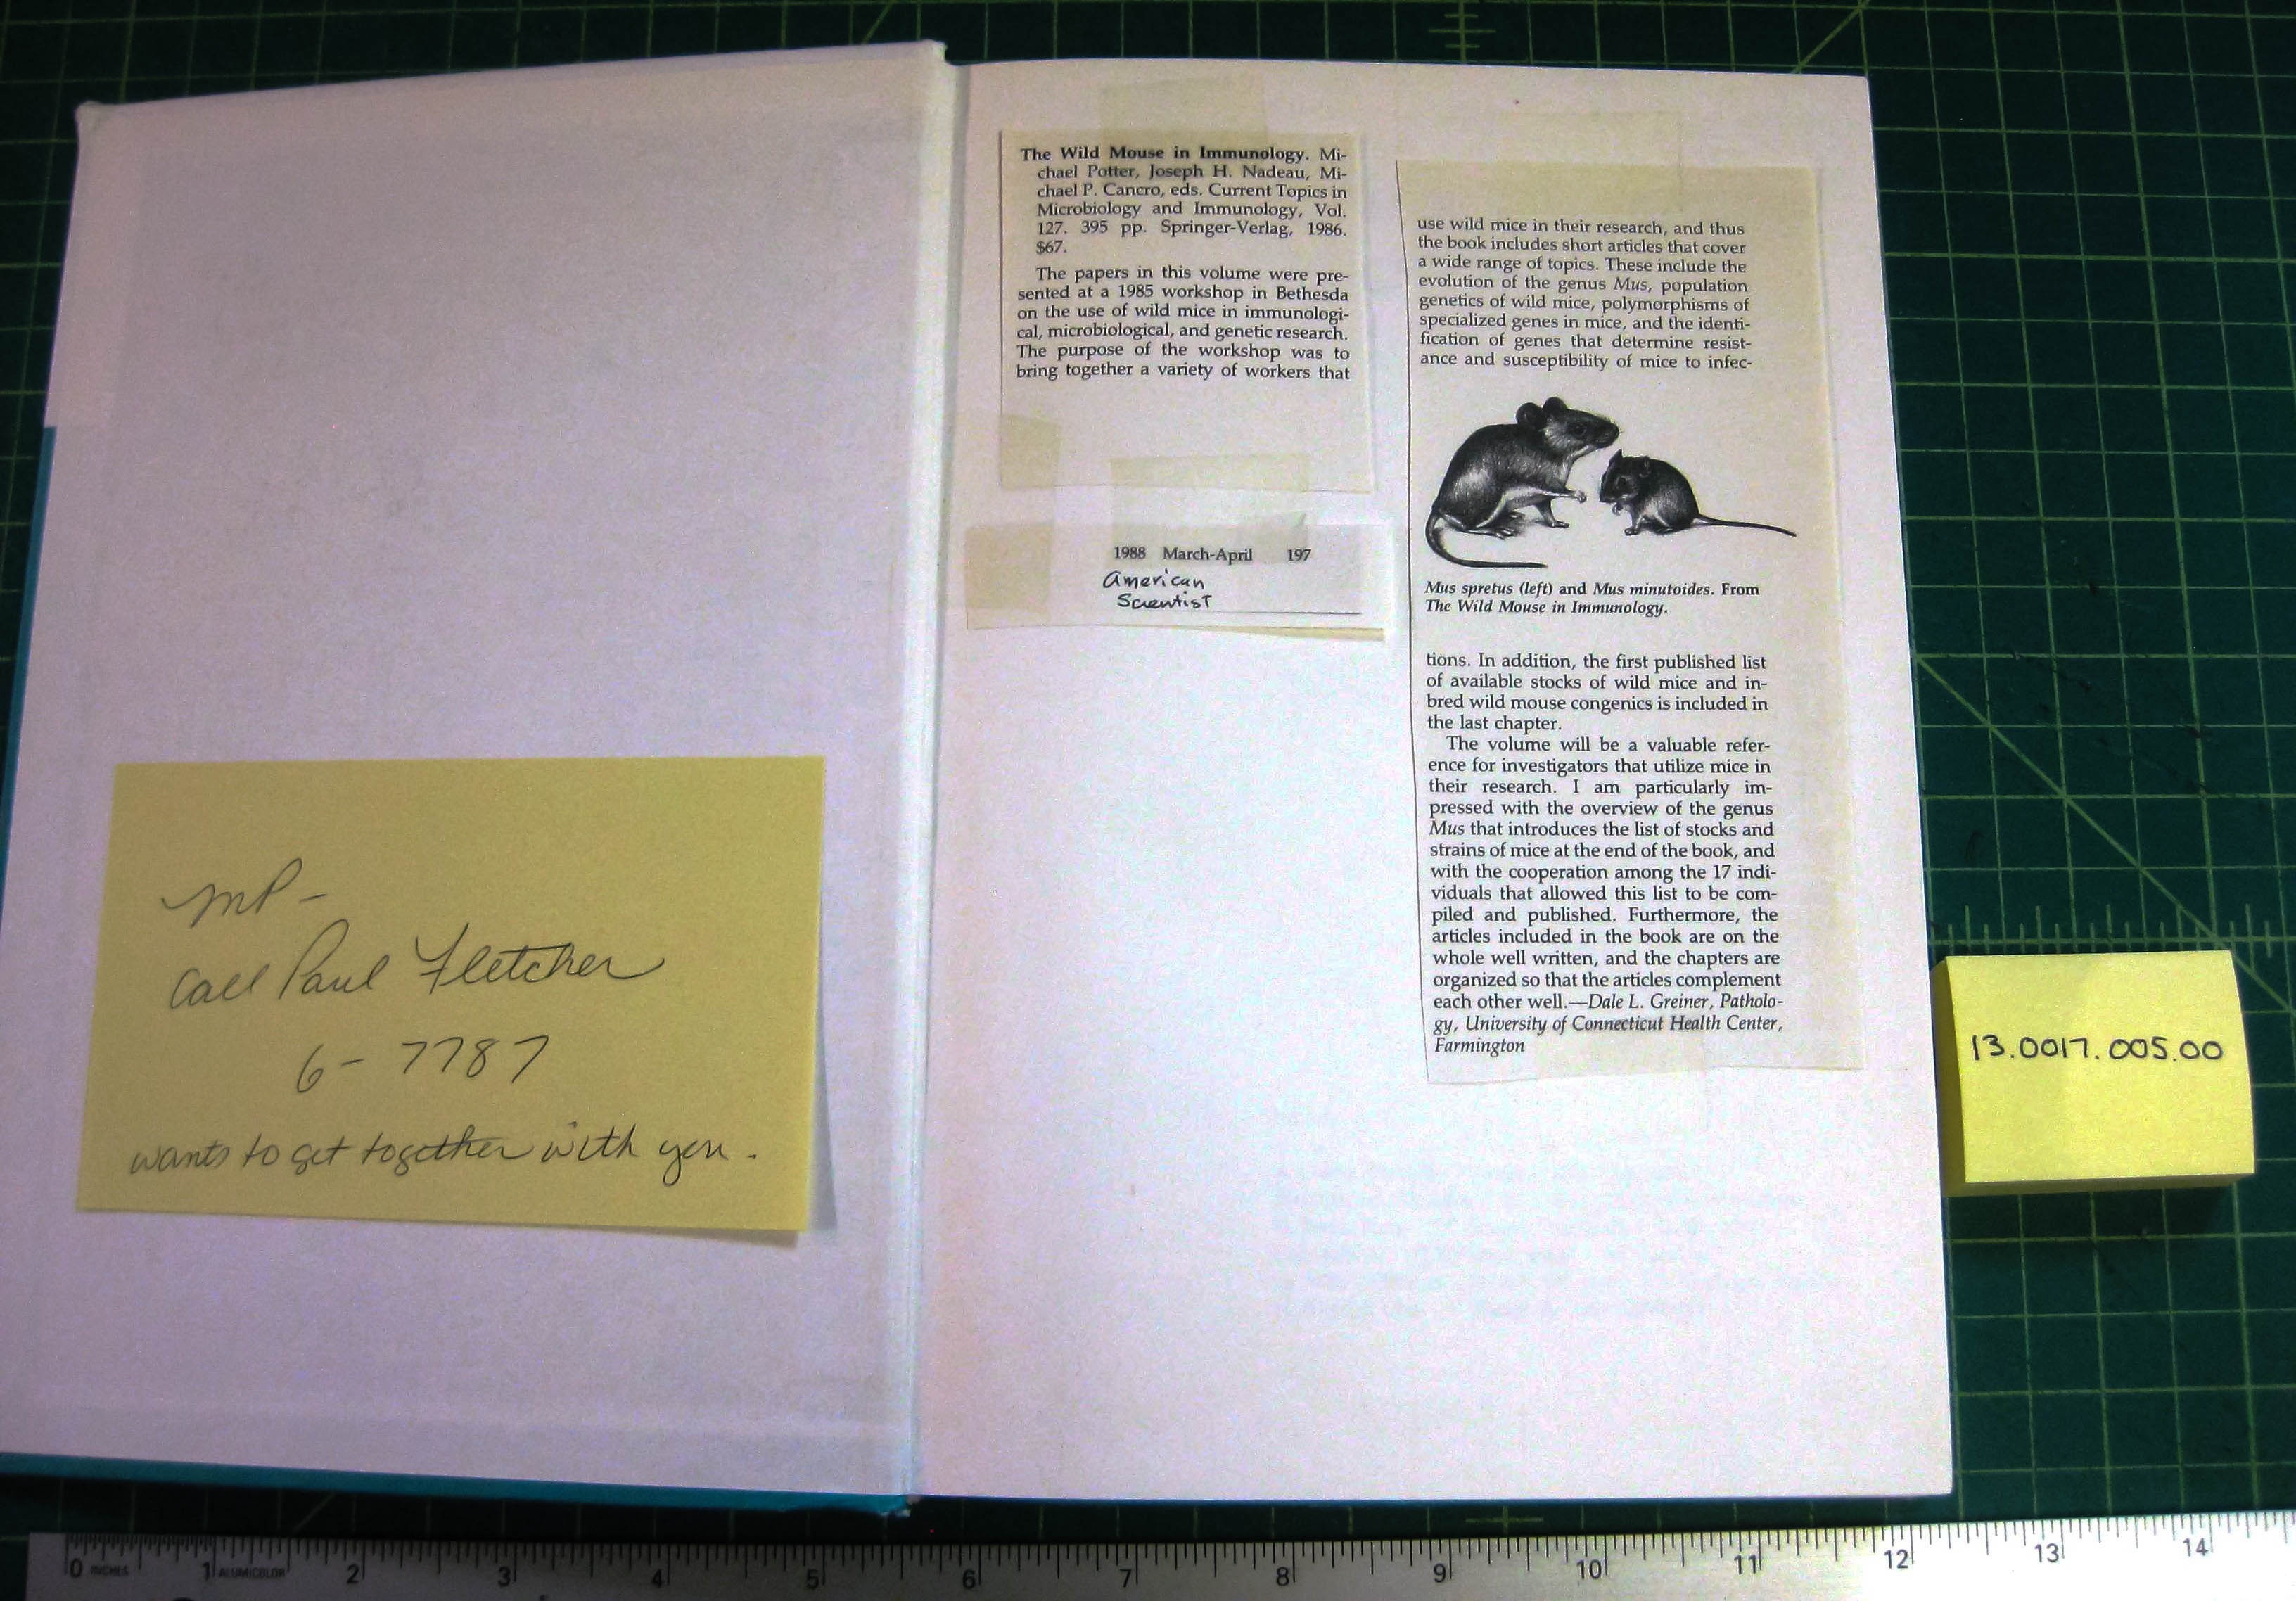 Inside page of book with notes and article clippings taped to inside